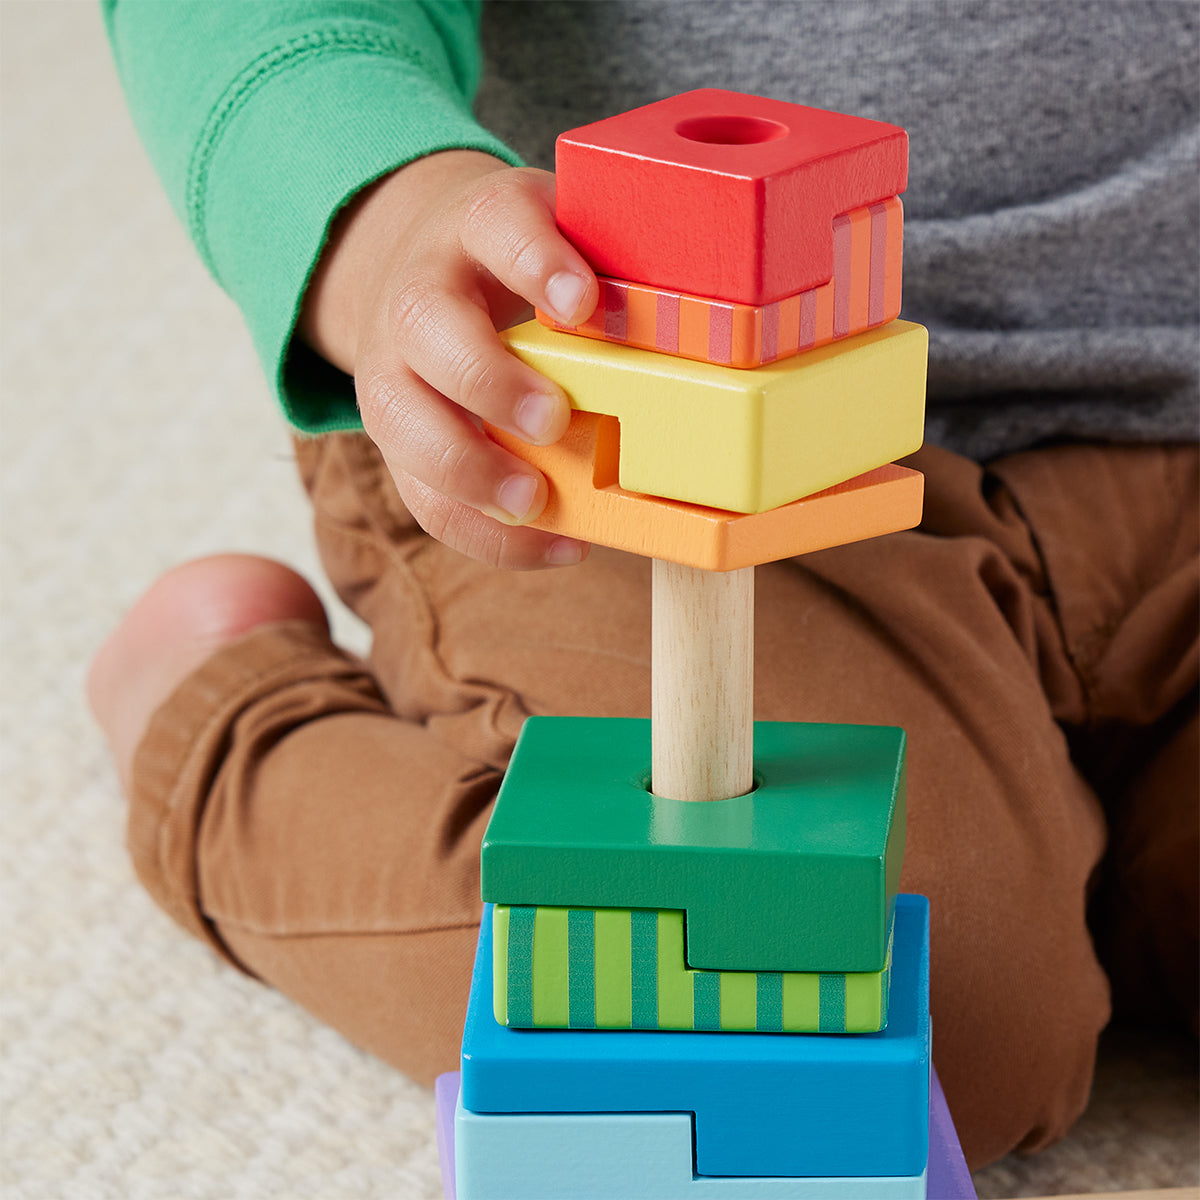 Fisher-Price Wooden Stacking Shape Sorter